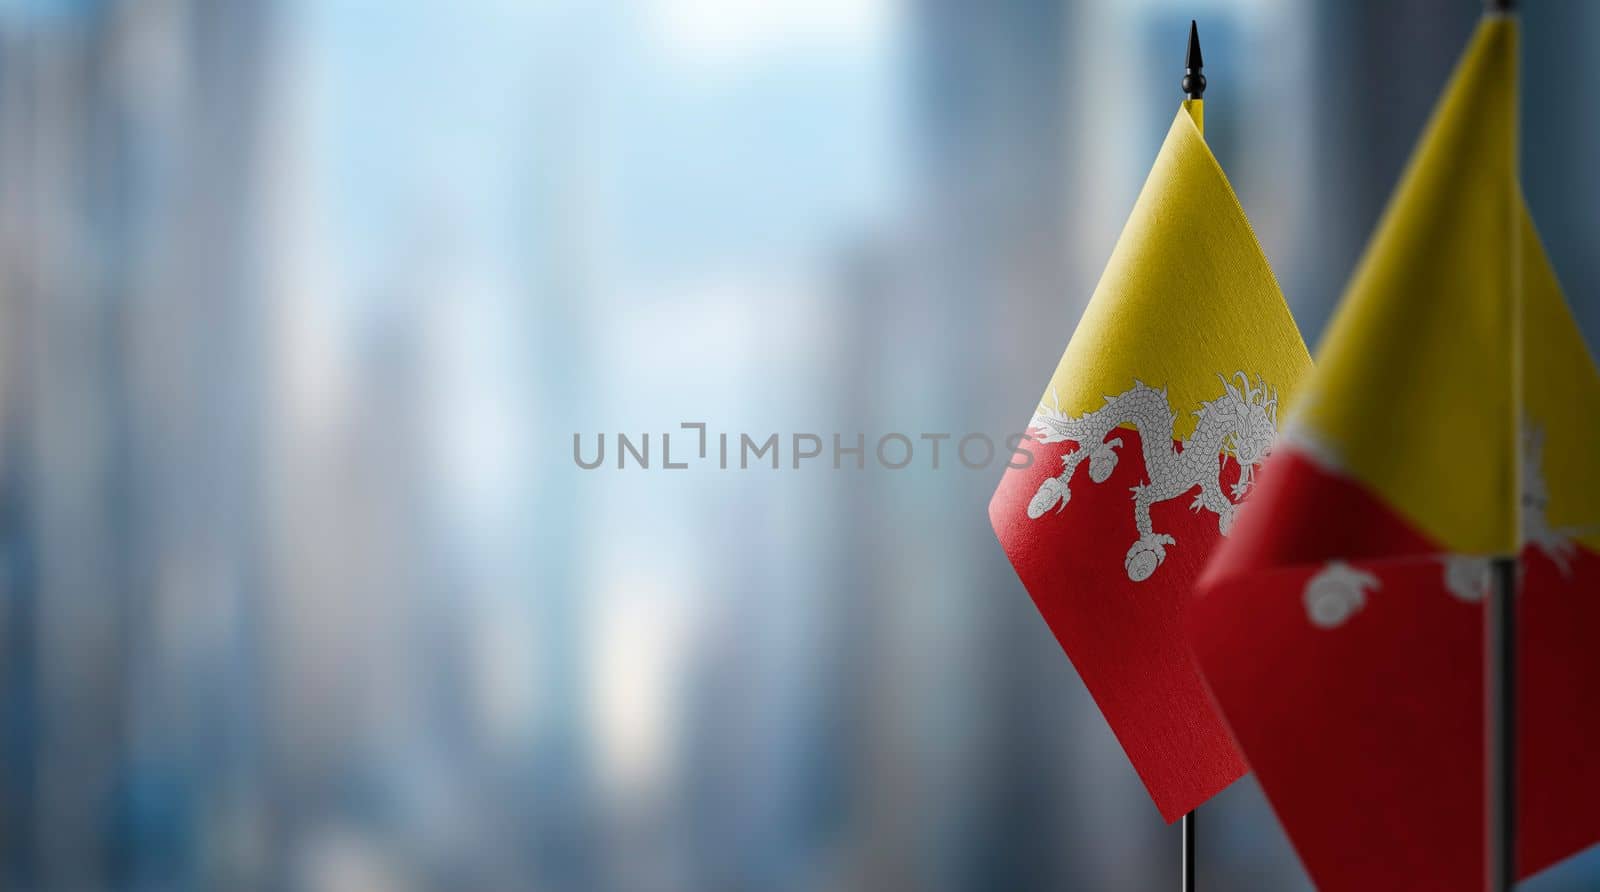 Small flags of the Bhutan on an abstract blurry background.